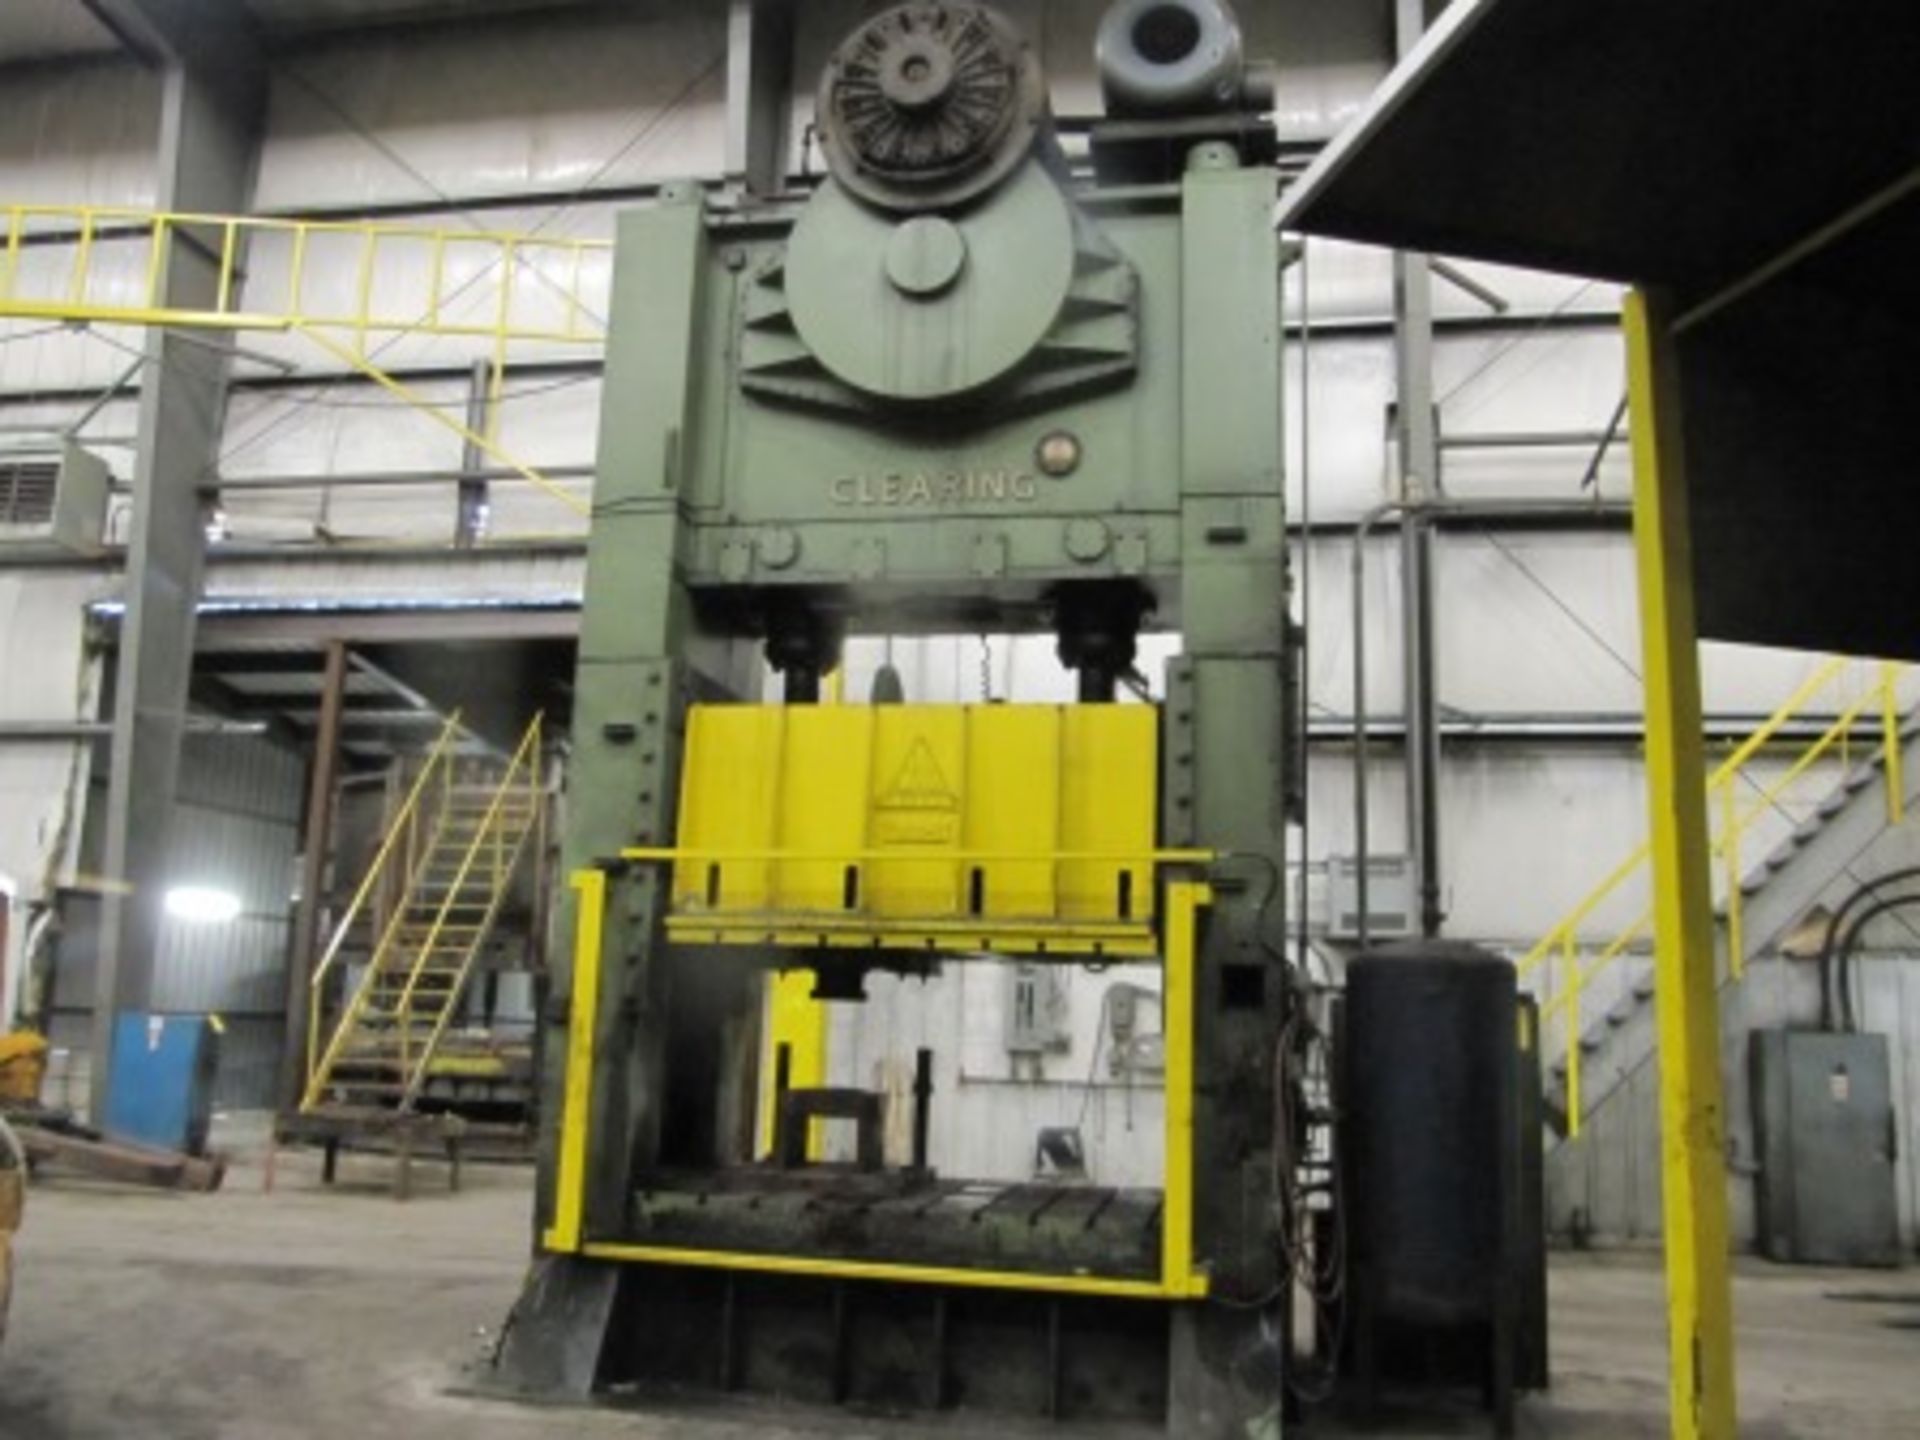 CLEARING F-2600-96 600-TON STRAIGHT SIDE PRESS, 96"X60" BED, 18" STROKE, 46" SHUT HEIGHT W/COMMAND - Image 3 of 6